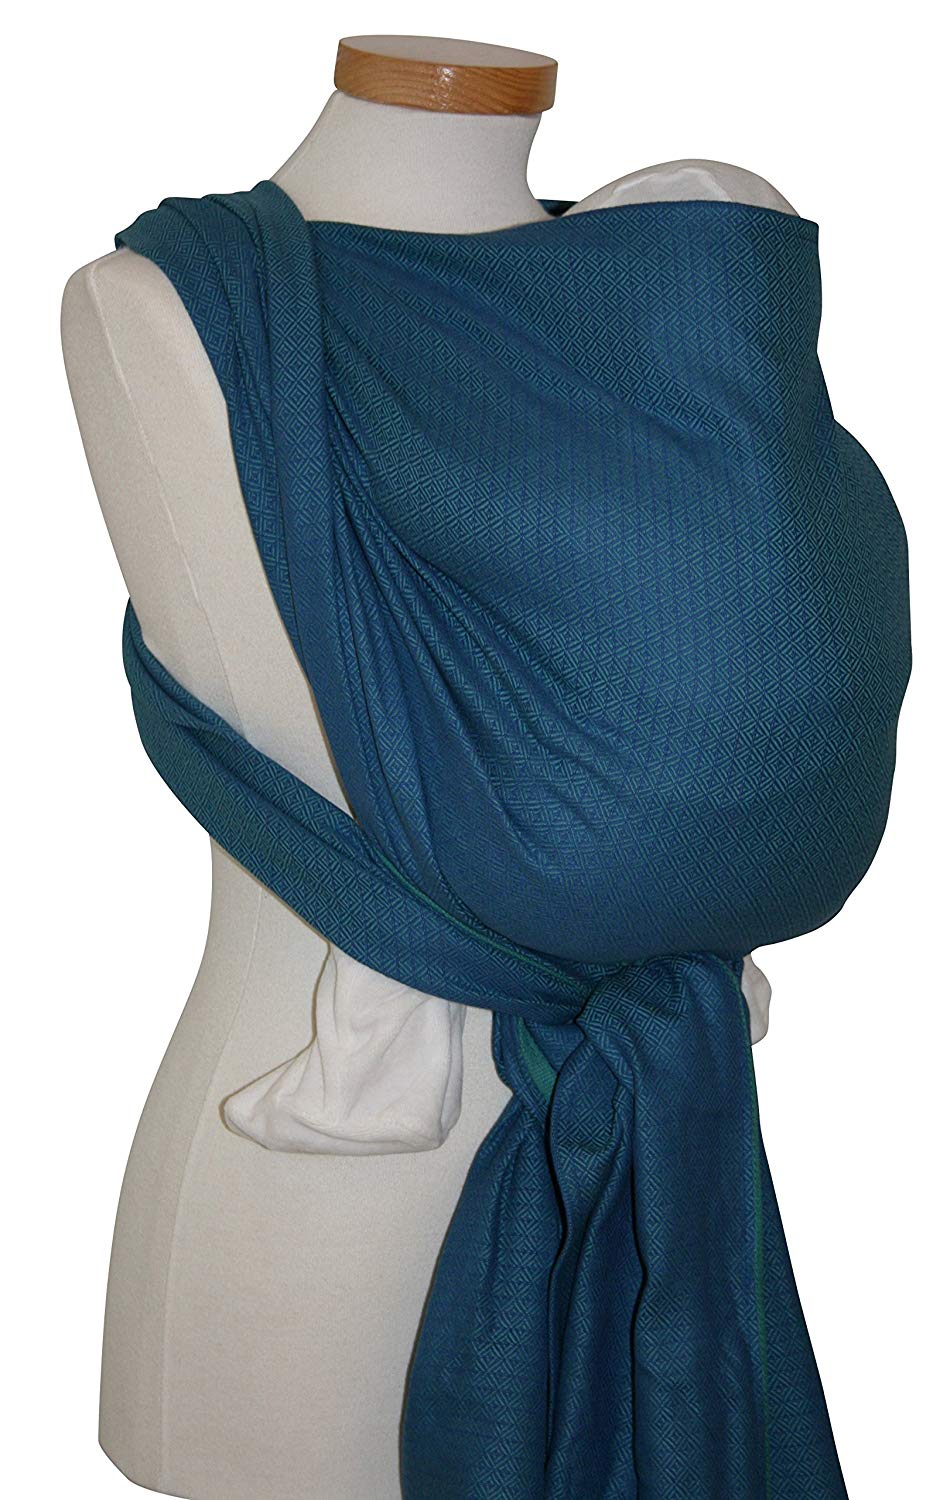 Storchenwiege Leo Baby Sling – Turquoise blue